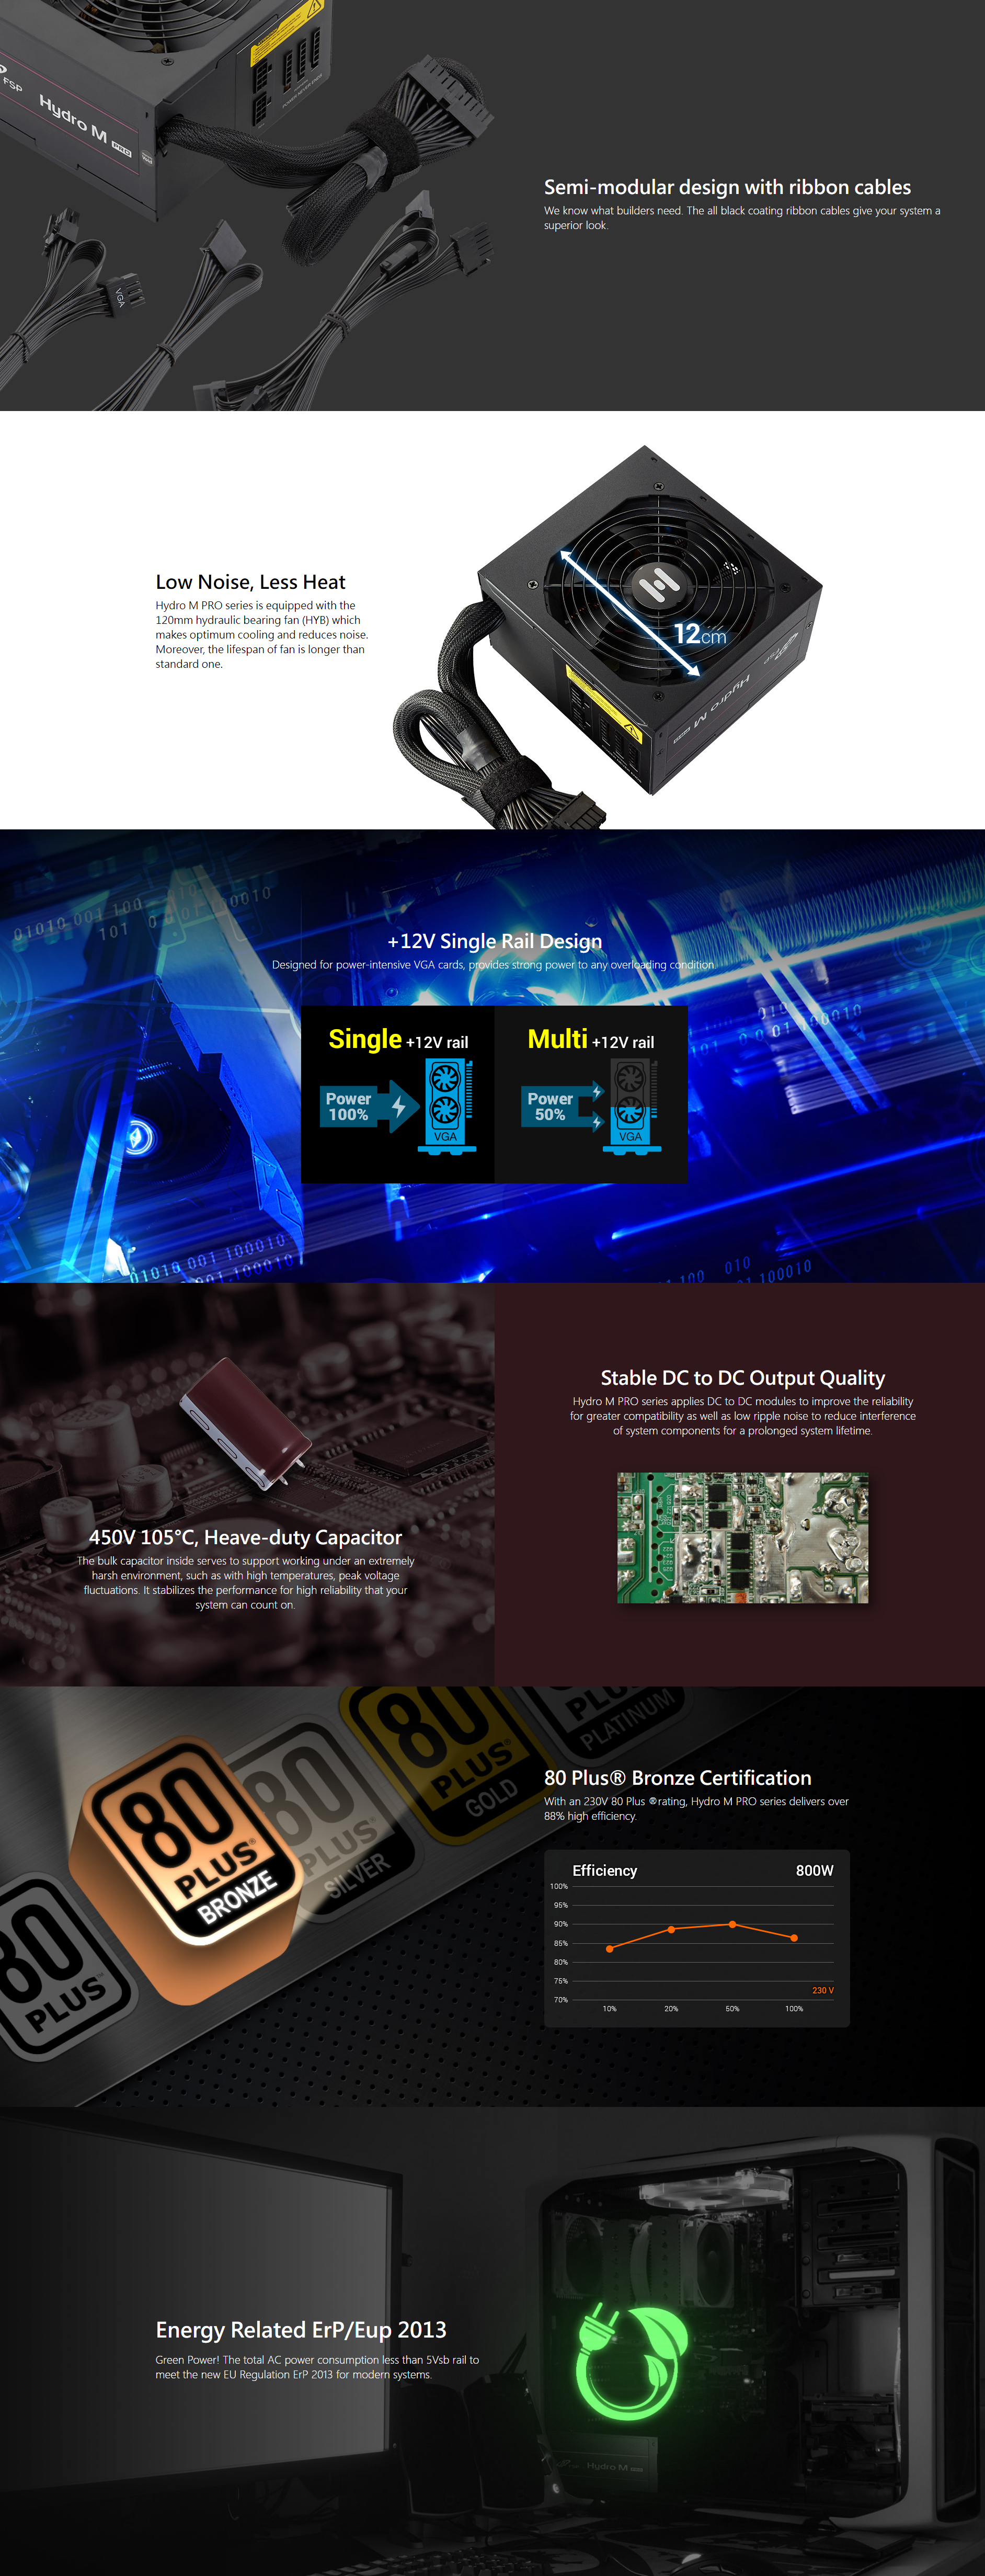 A large marketing image providing additional information about the product FSP Hydro M PRO 800W Bronze PCIe 5.0 ATX Semi-Modular PSU - Additional alt info not provided